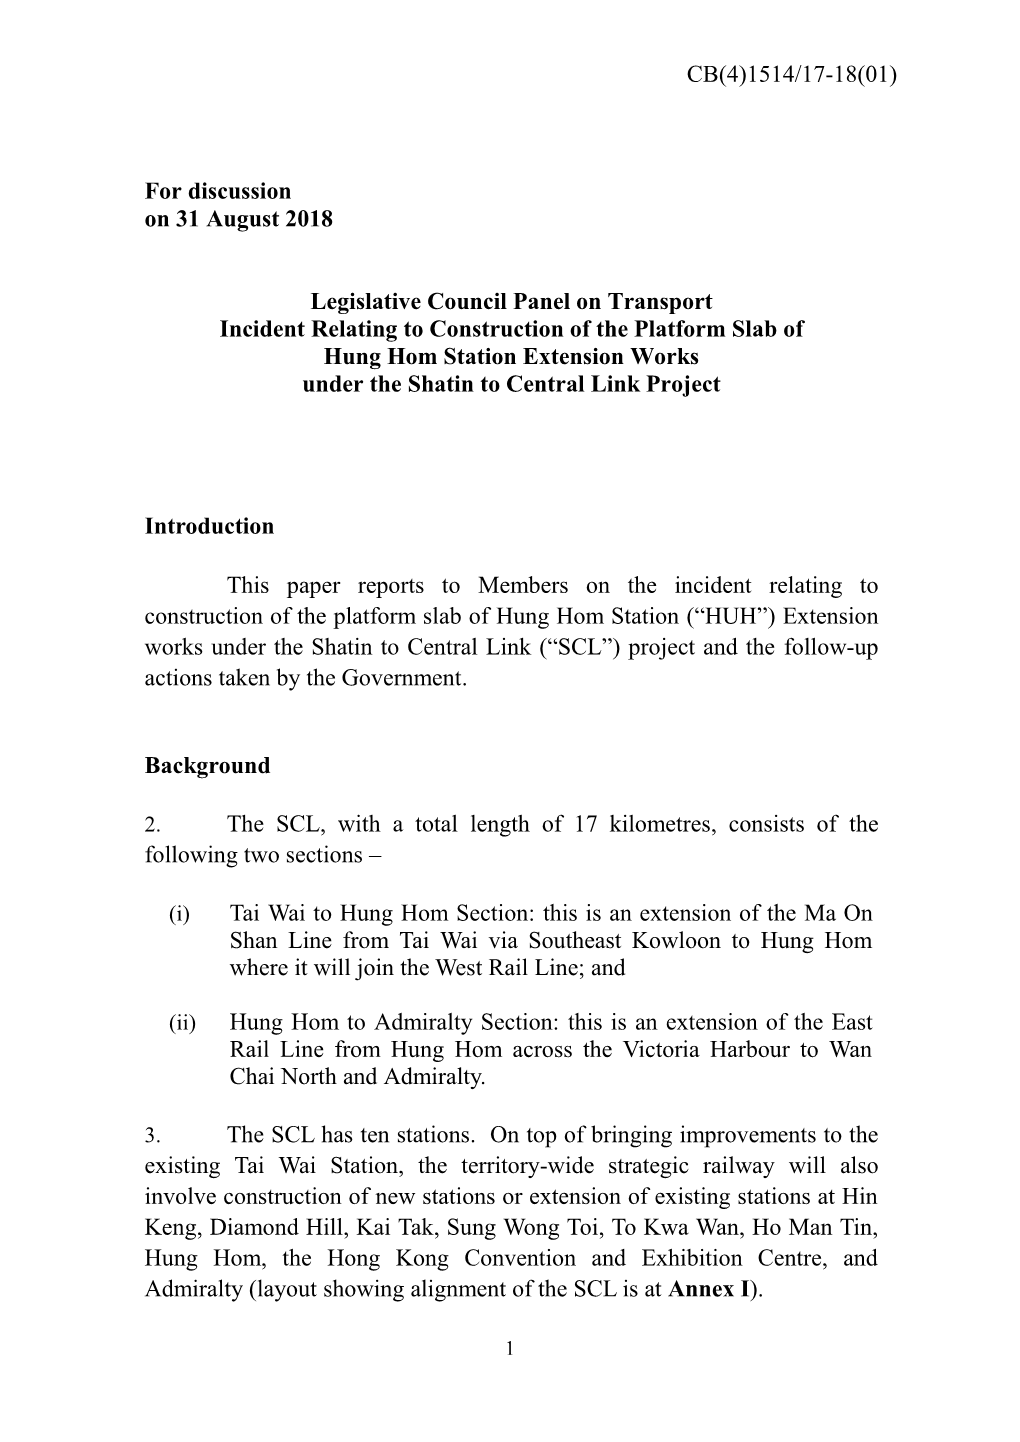 For Discussion on 31 August 2018 Legislative Council Panel on Transport Incident Relating to Construction of the Platform Slab O